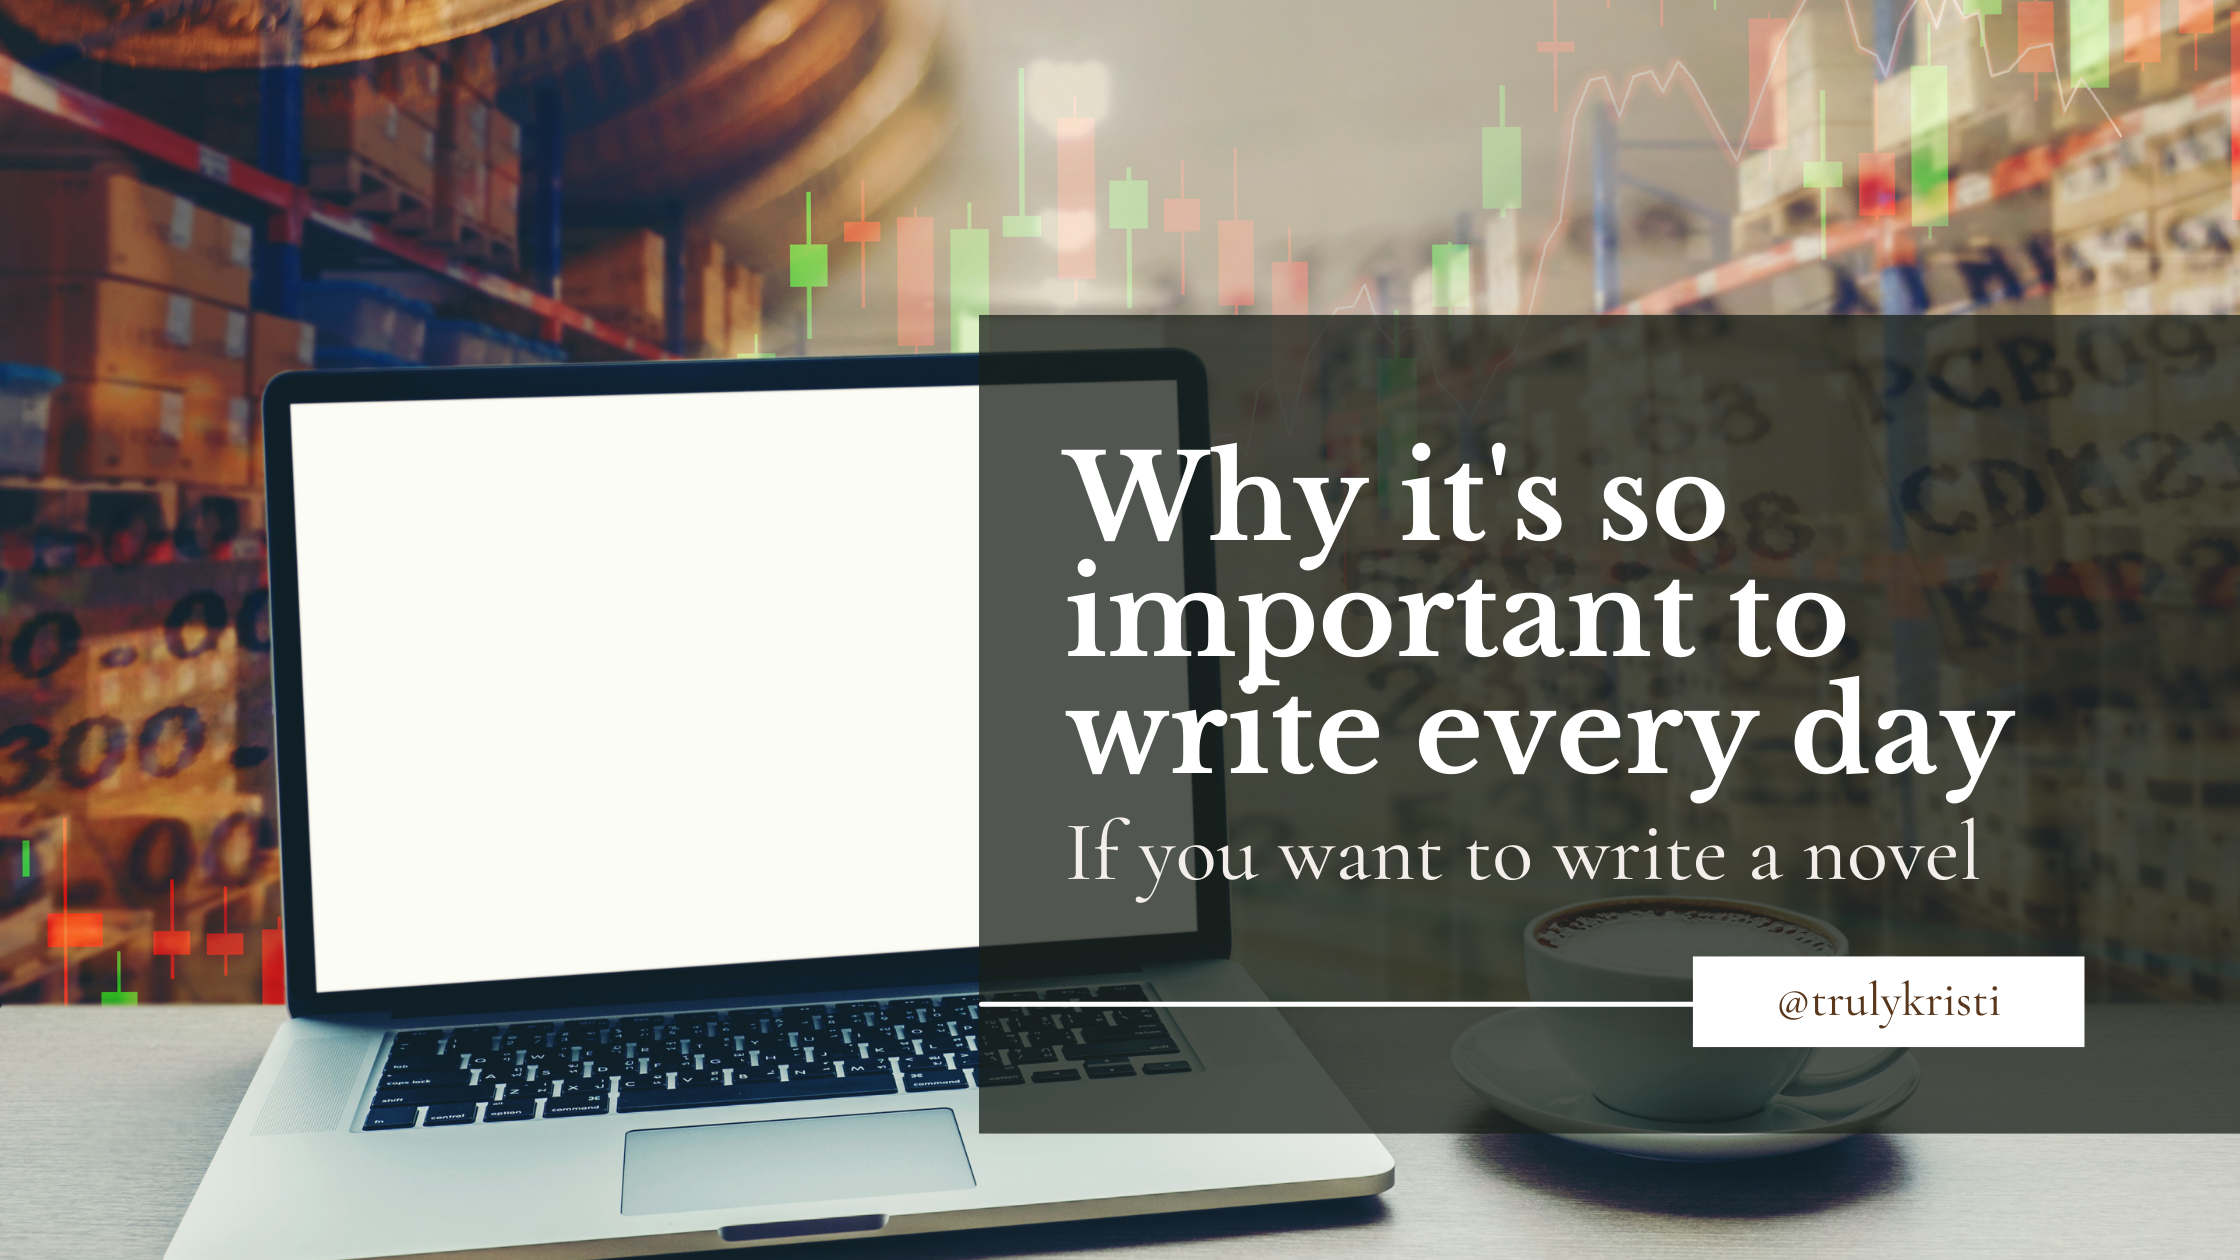 The importance of writing every day